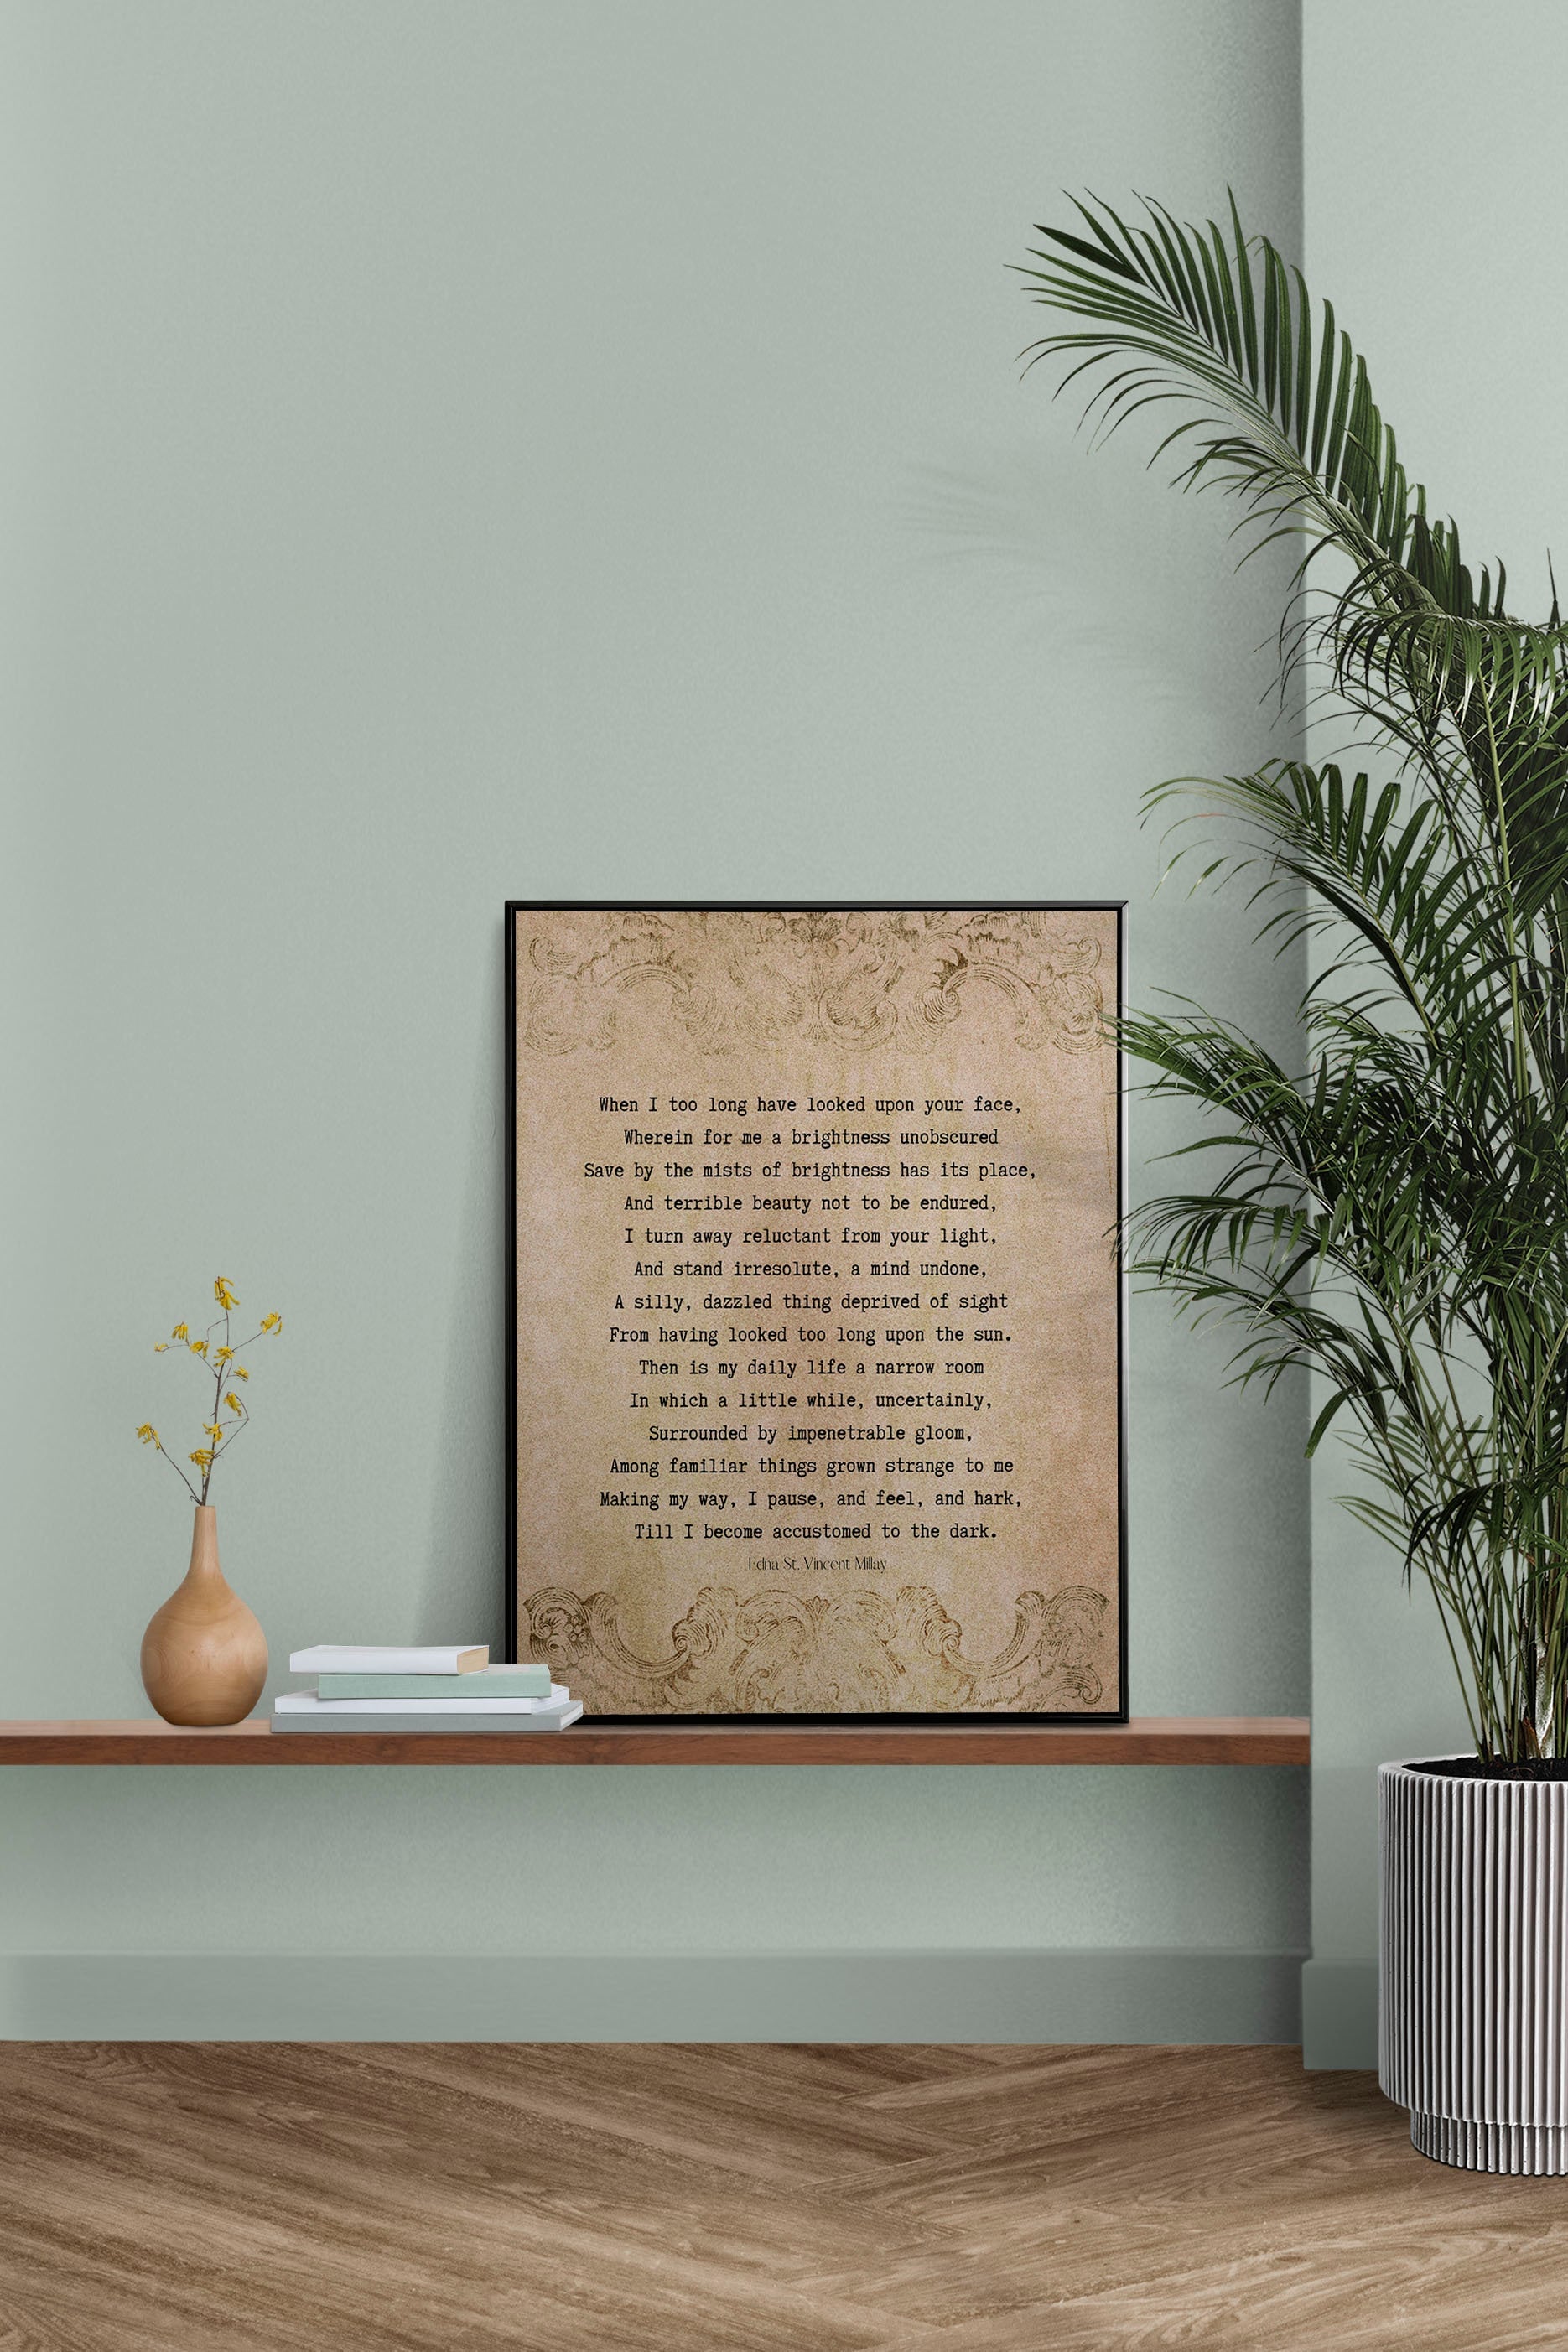 Edna St. Vincent Millay Poem Print - When I Too Long Have Looked Upon Your Face Poetry Print in a Vintage Style Unframed and Framed Art